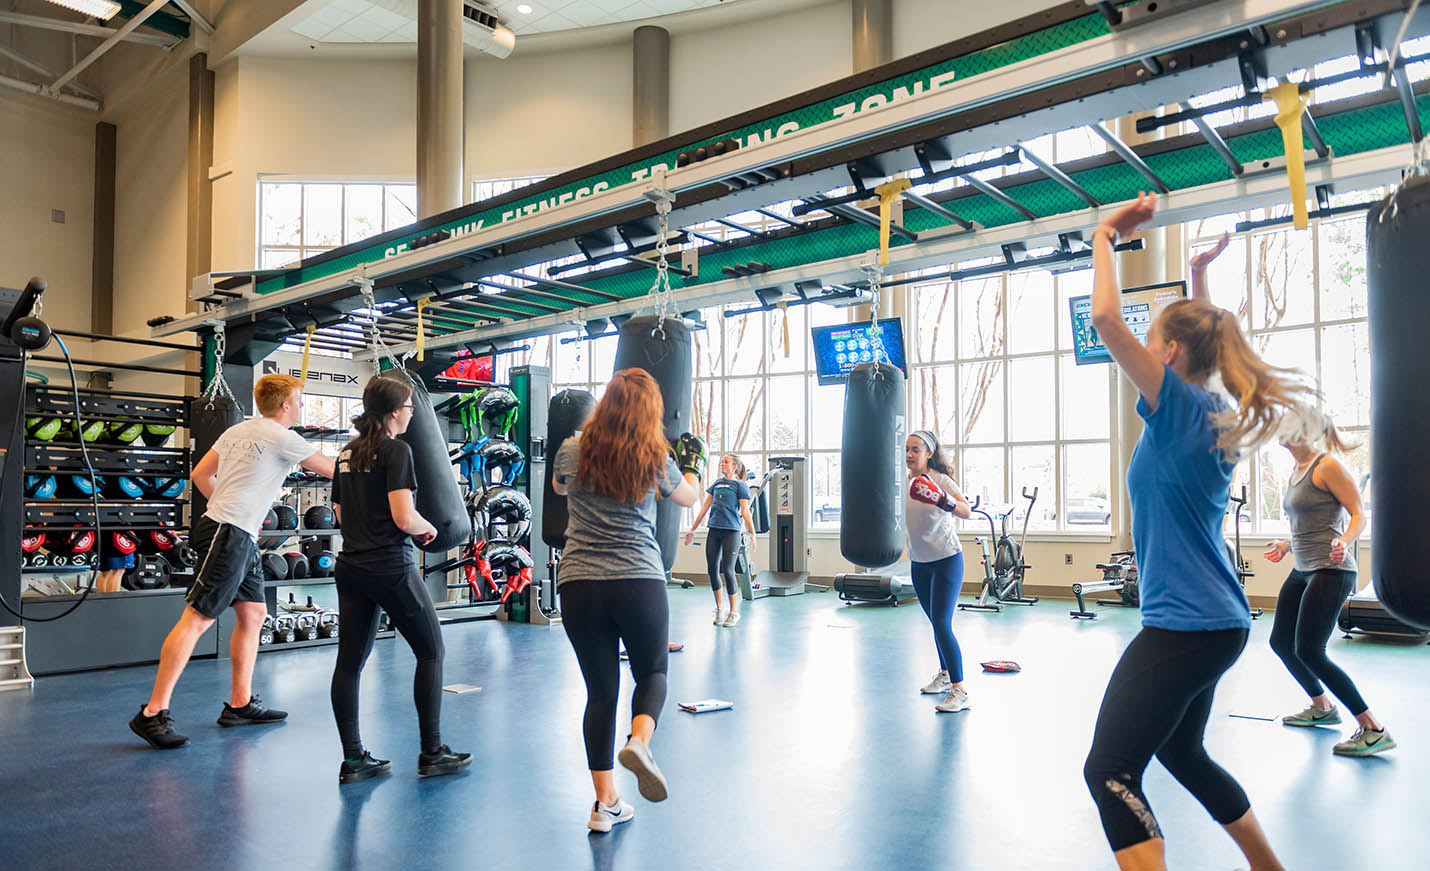 A fitness class practices with boxing gloves and bags.